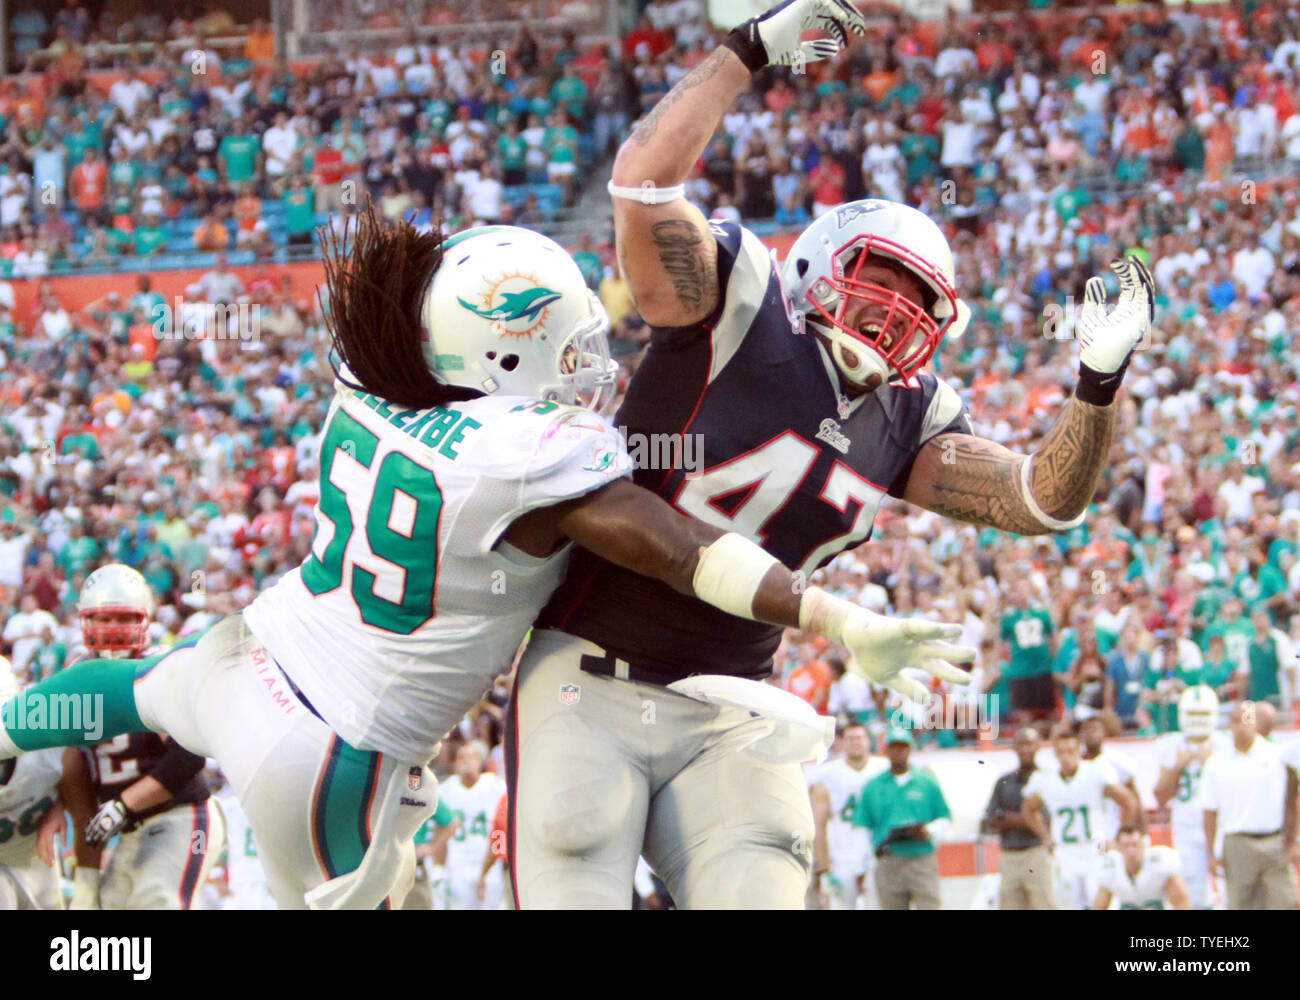 Miami Dolphins LB Dannell Ellerbe (59) breaks up a Brady pass intended for FB James Devlin (47) against the New England Patriots during the final seconds at Sun Life Stadium in Miami, Florida on December 15, 2013. The Dolphins defeated the Patriots  24-20.    UPI/Susan Knowles Stock Photo